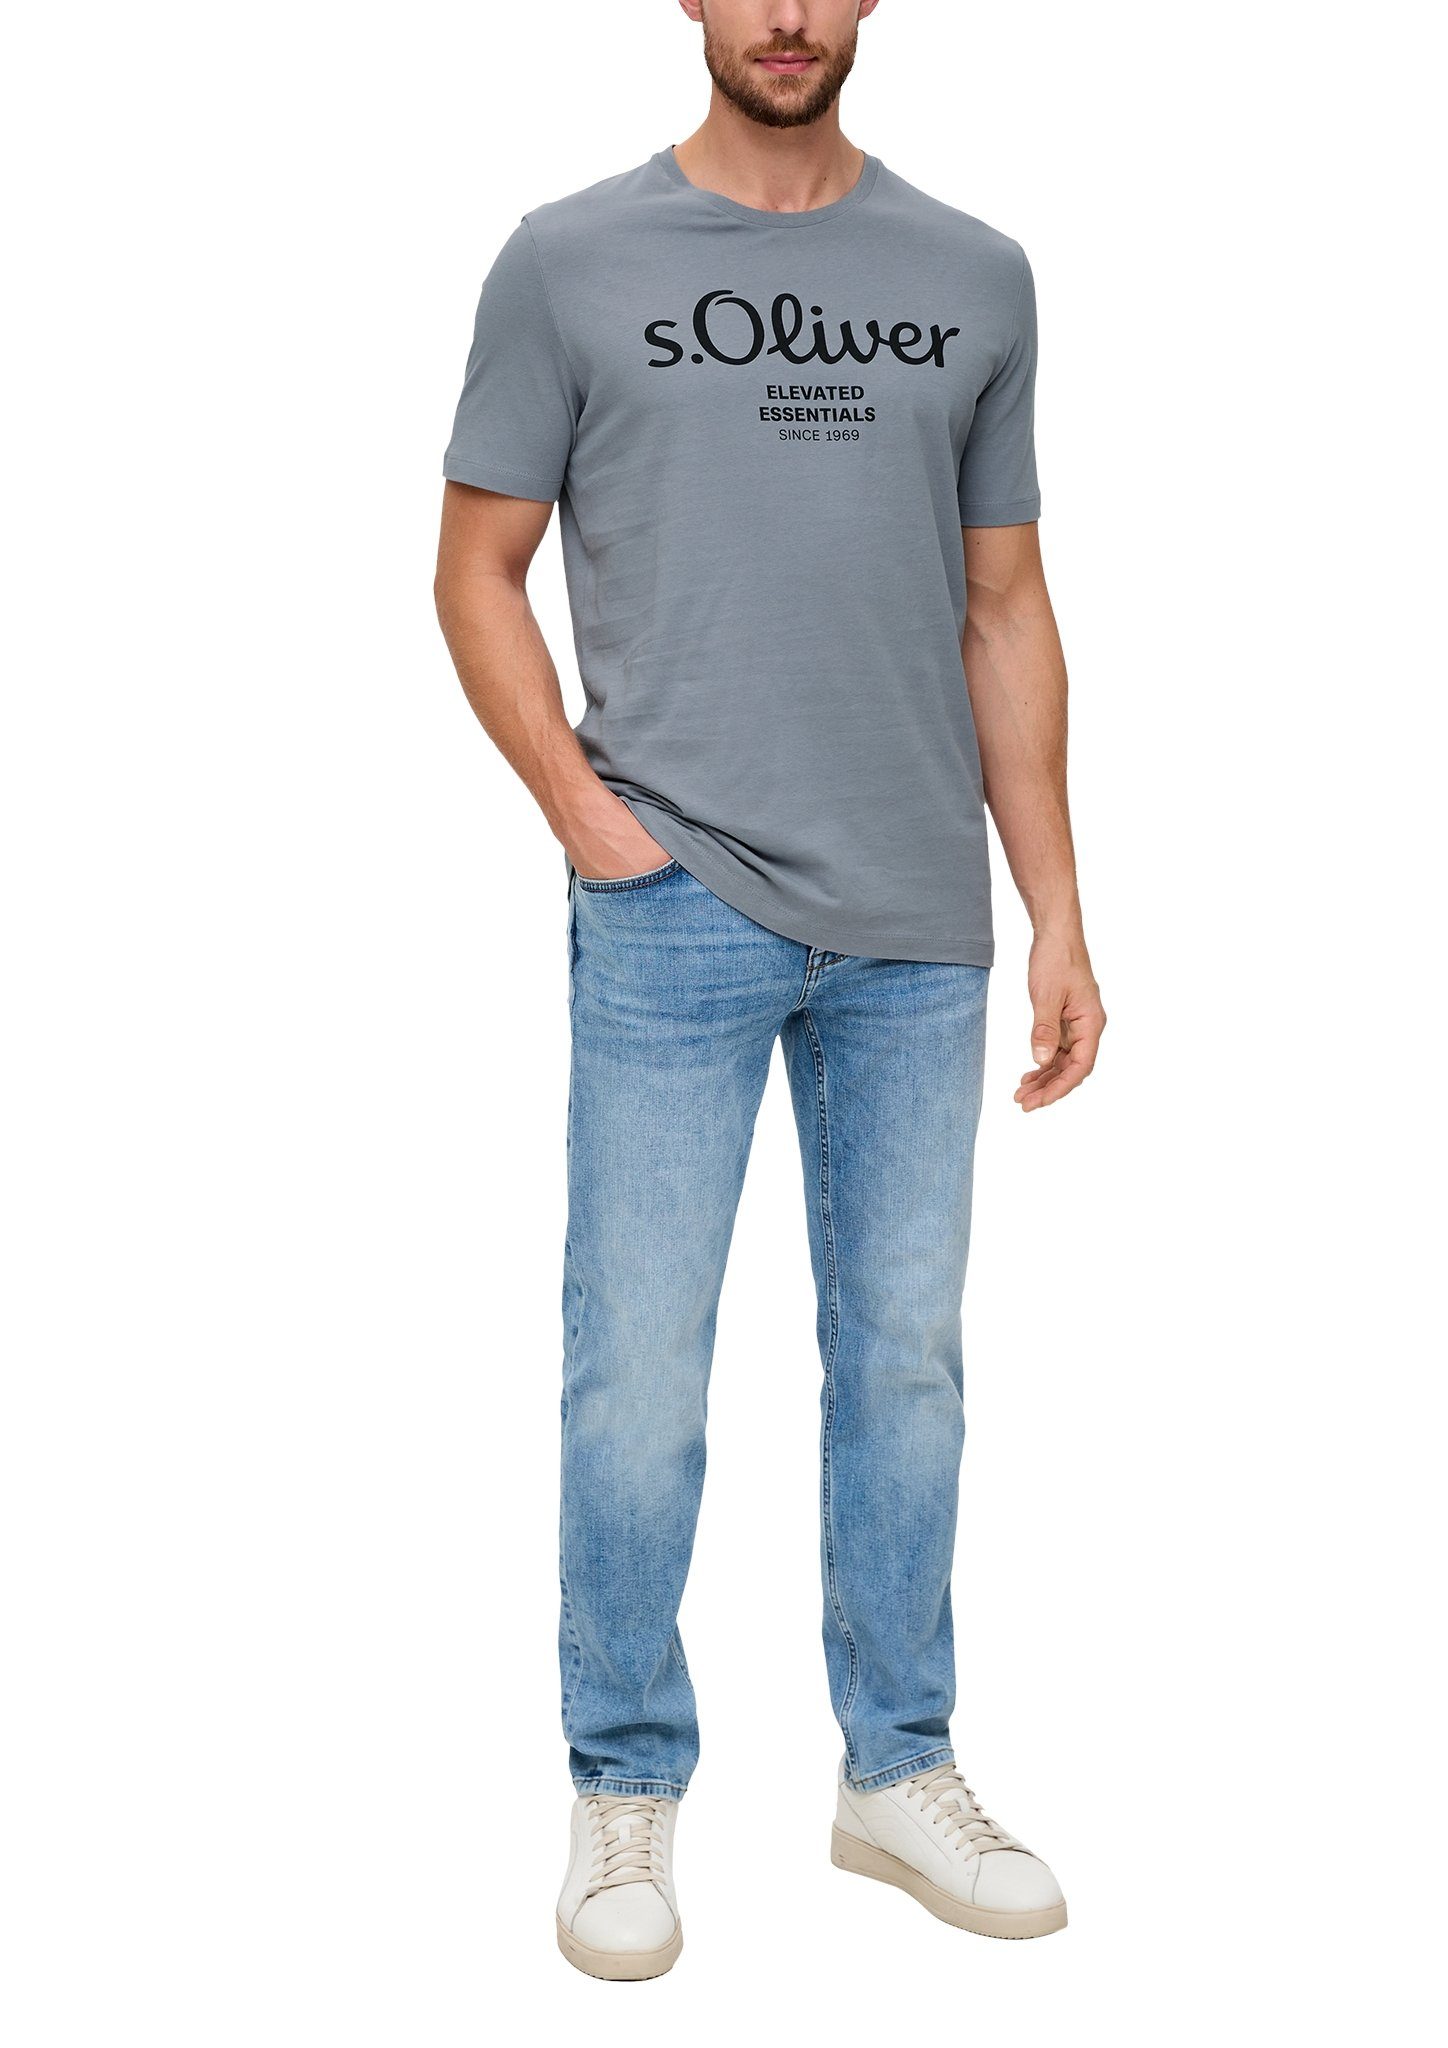 mid T-Shirt Look grey s.Oliver sportiven im